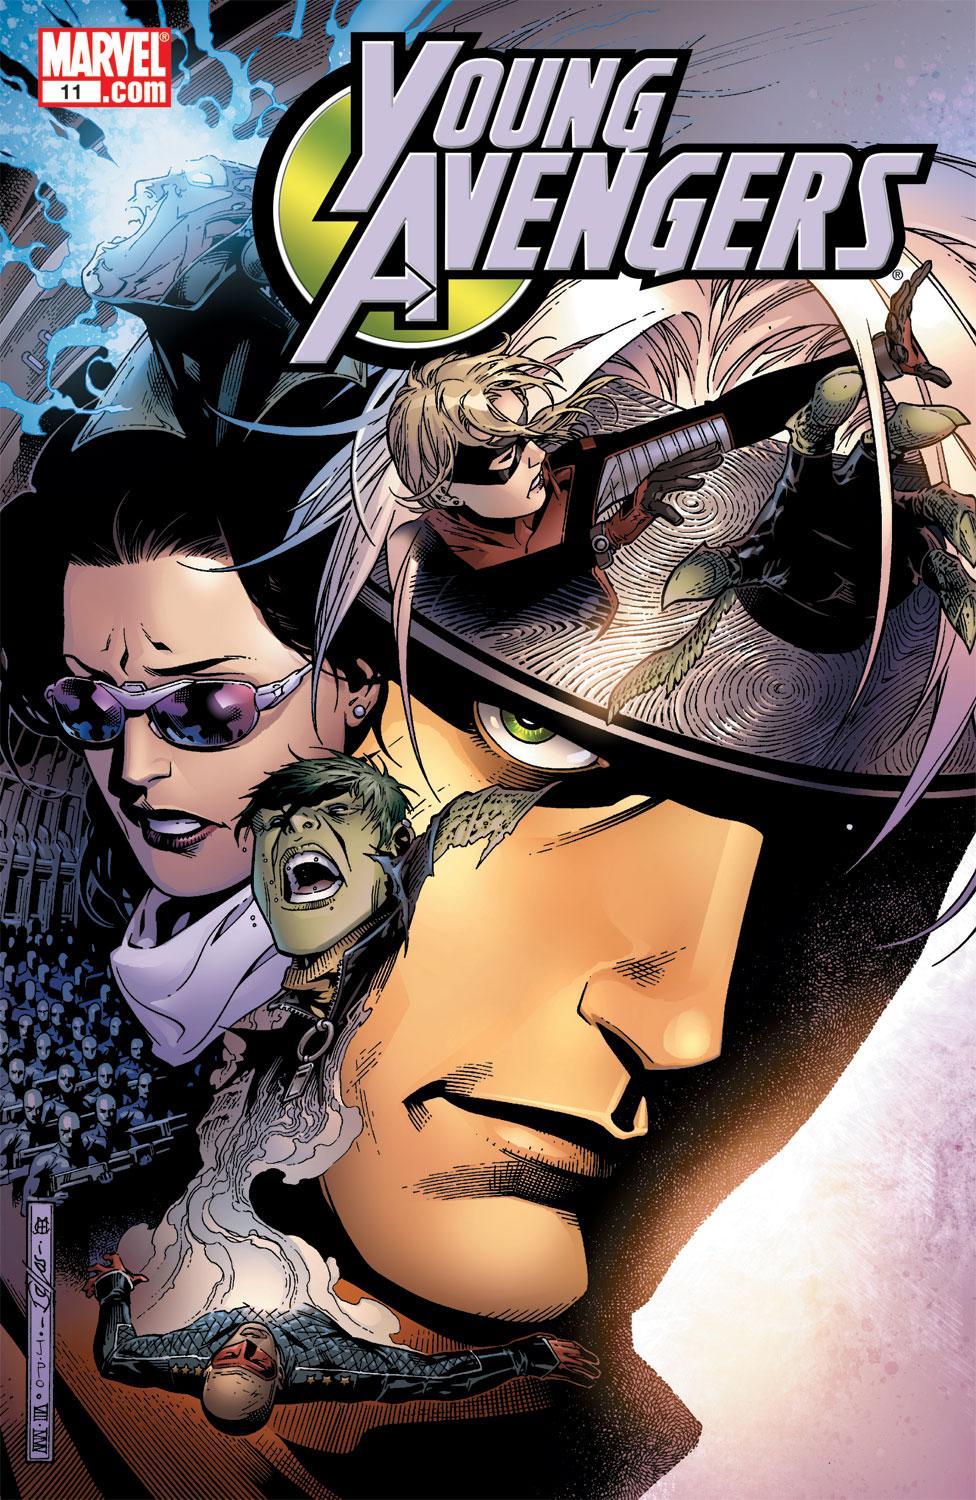 Young Avengers (2005) #11